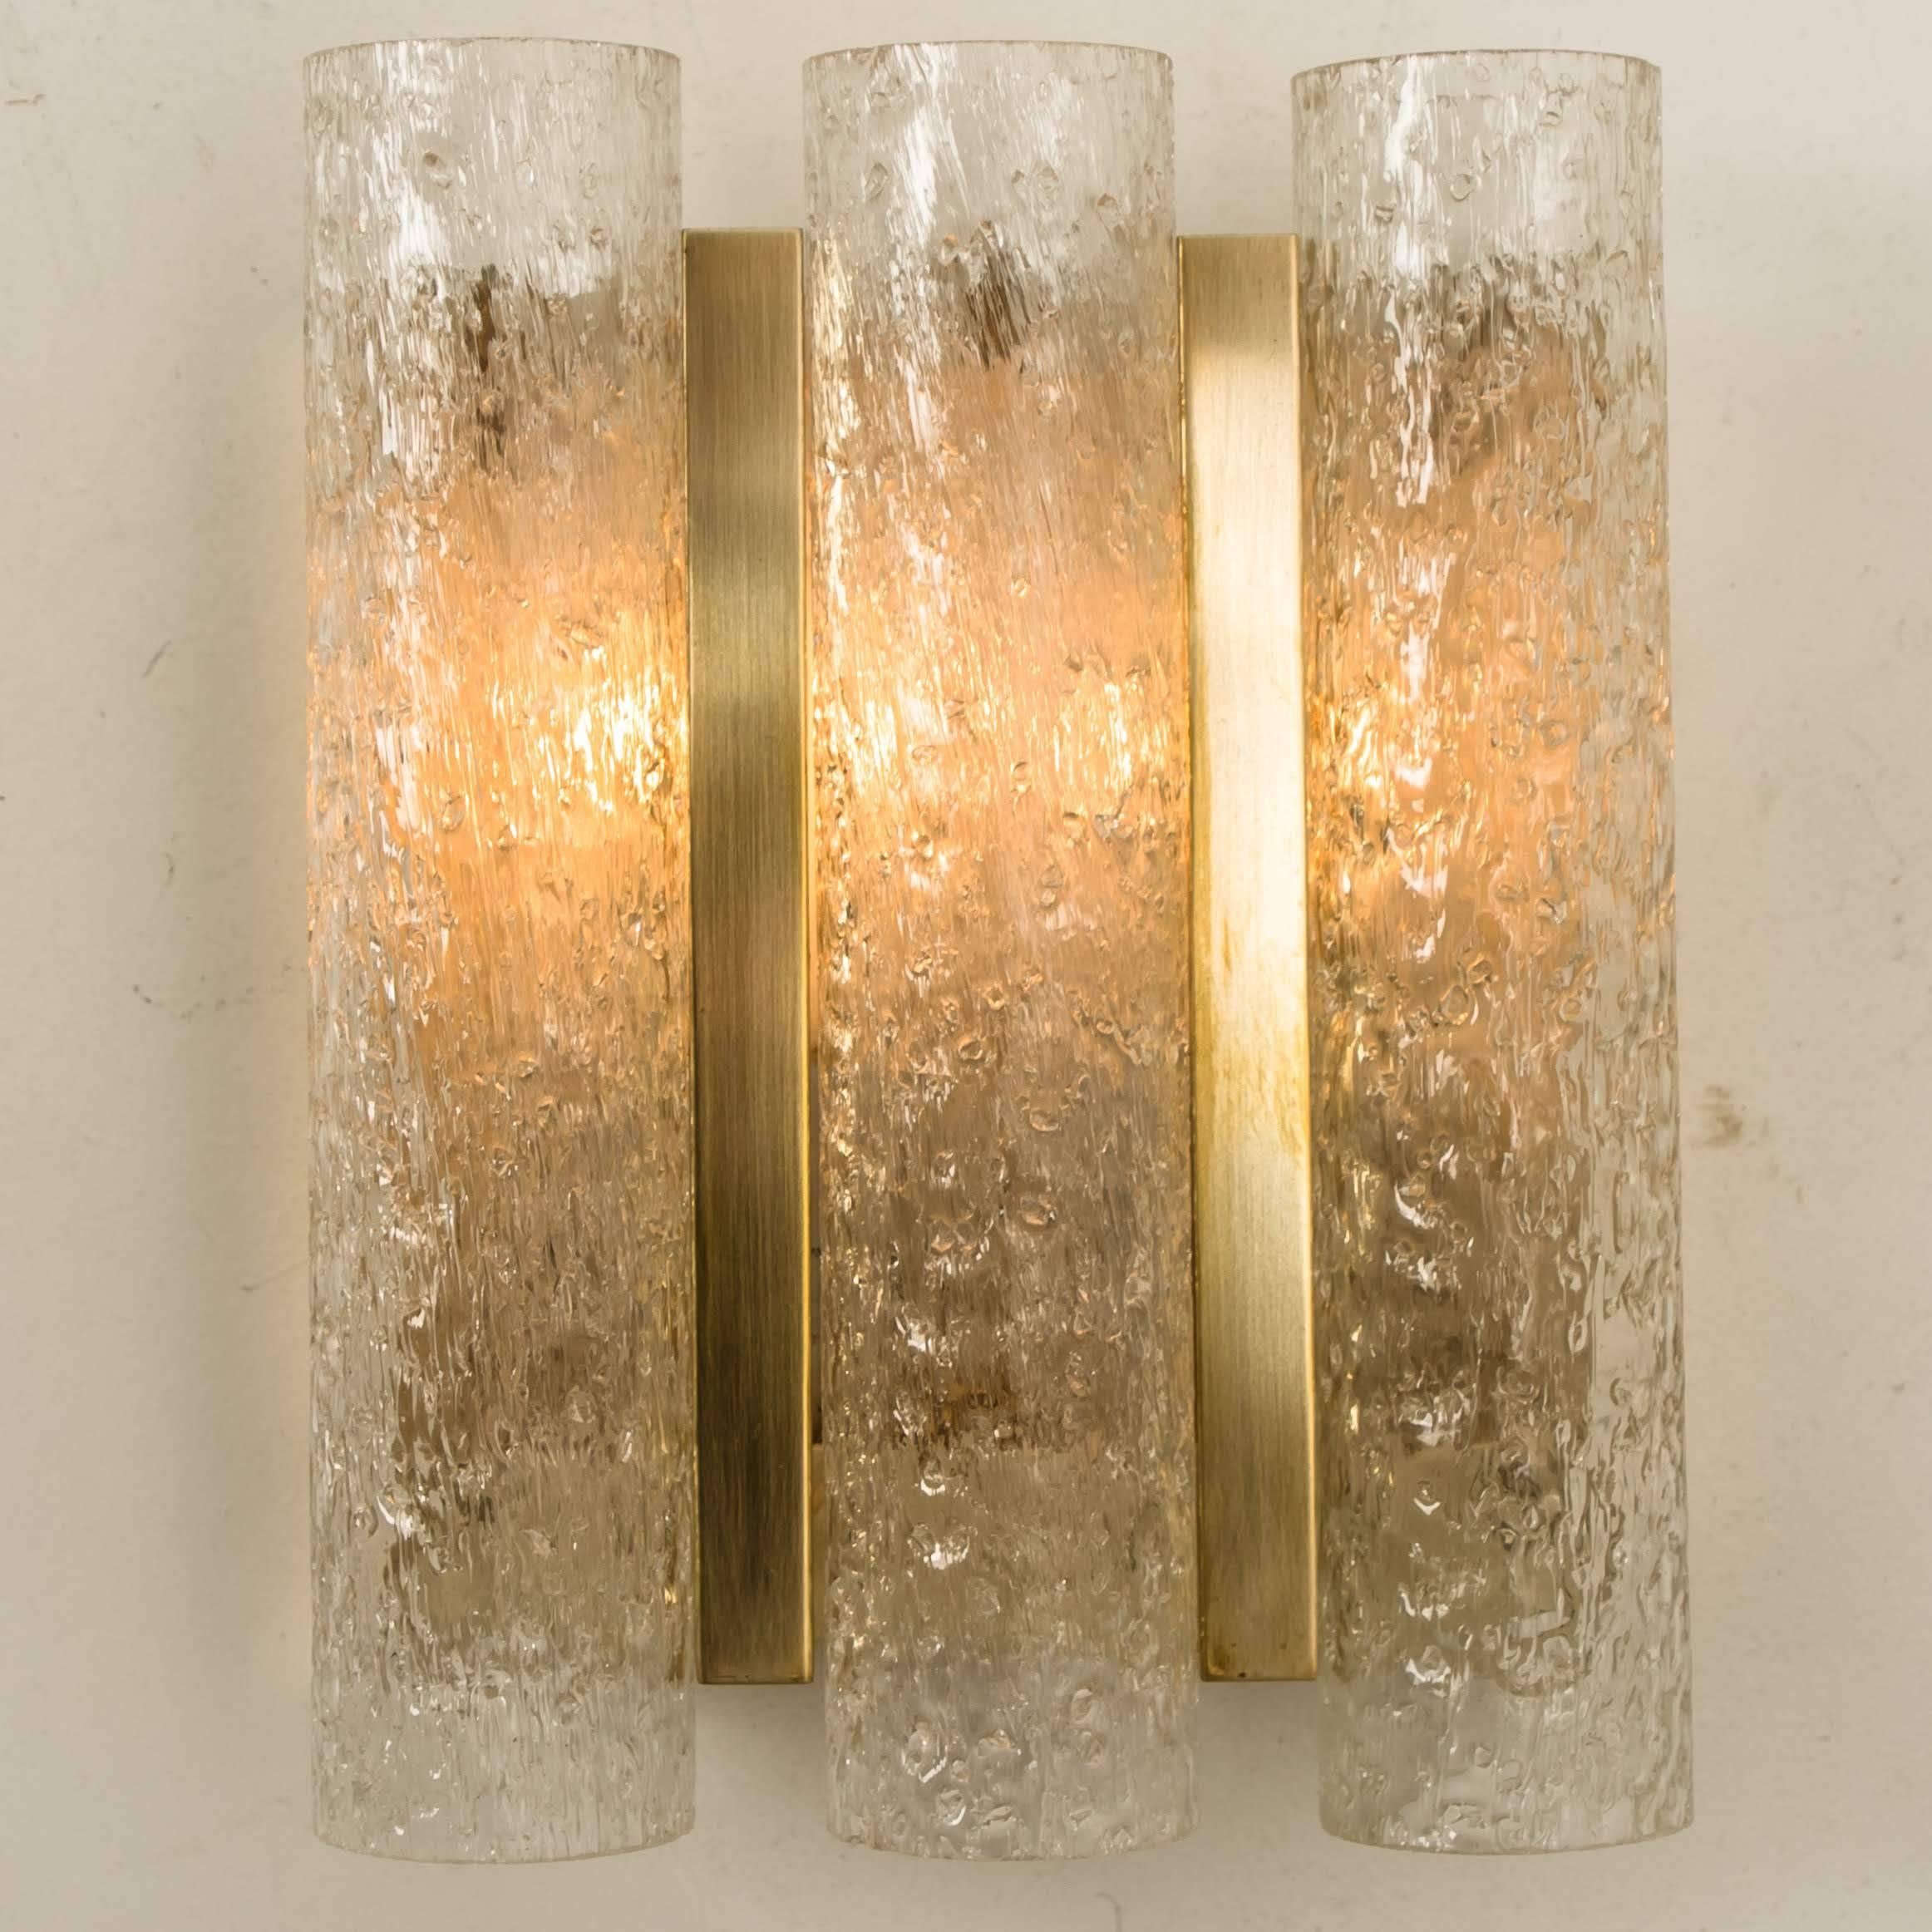 Steel Set of Six Glass Brass Light Fixtures by Doria, Germany, 1960s For Sale